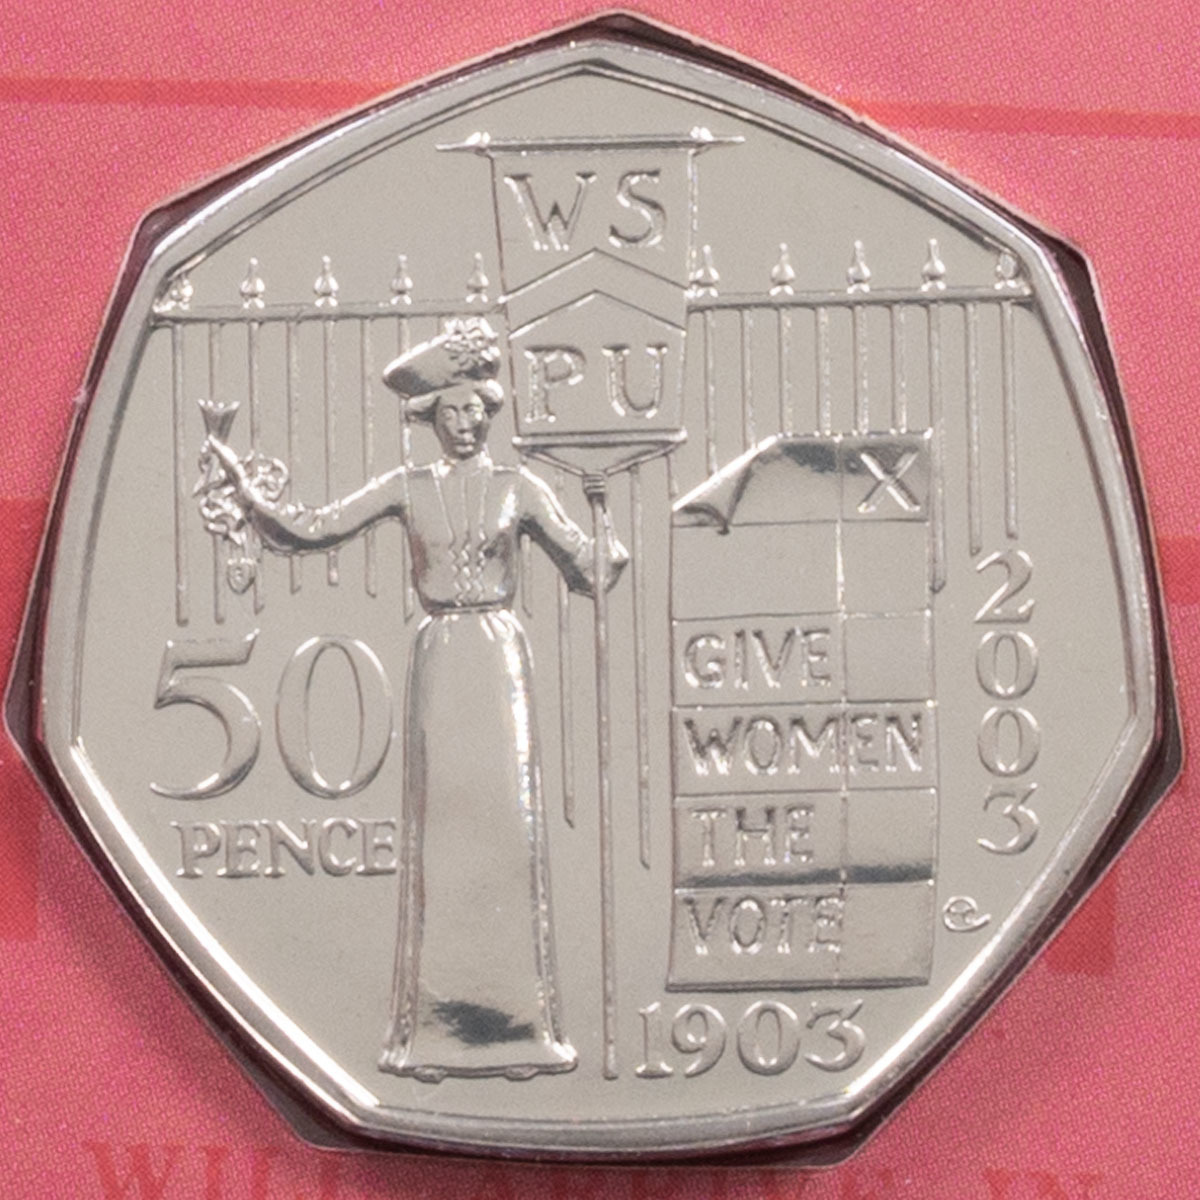 UKSMBU 2003 Suffragettes WSPU Votes For Women Fifty Pence Brilliant Uncirculated Coin In Folder Reverse